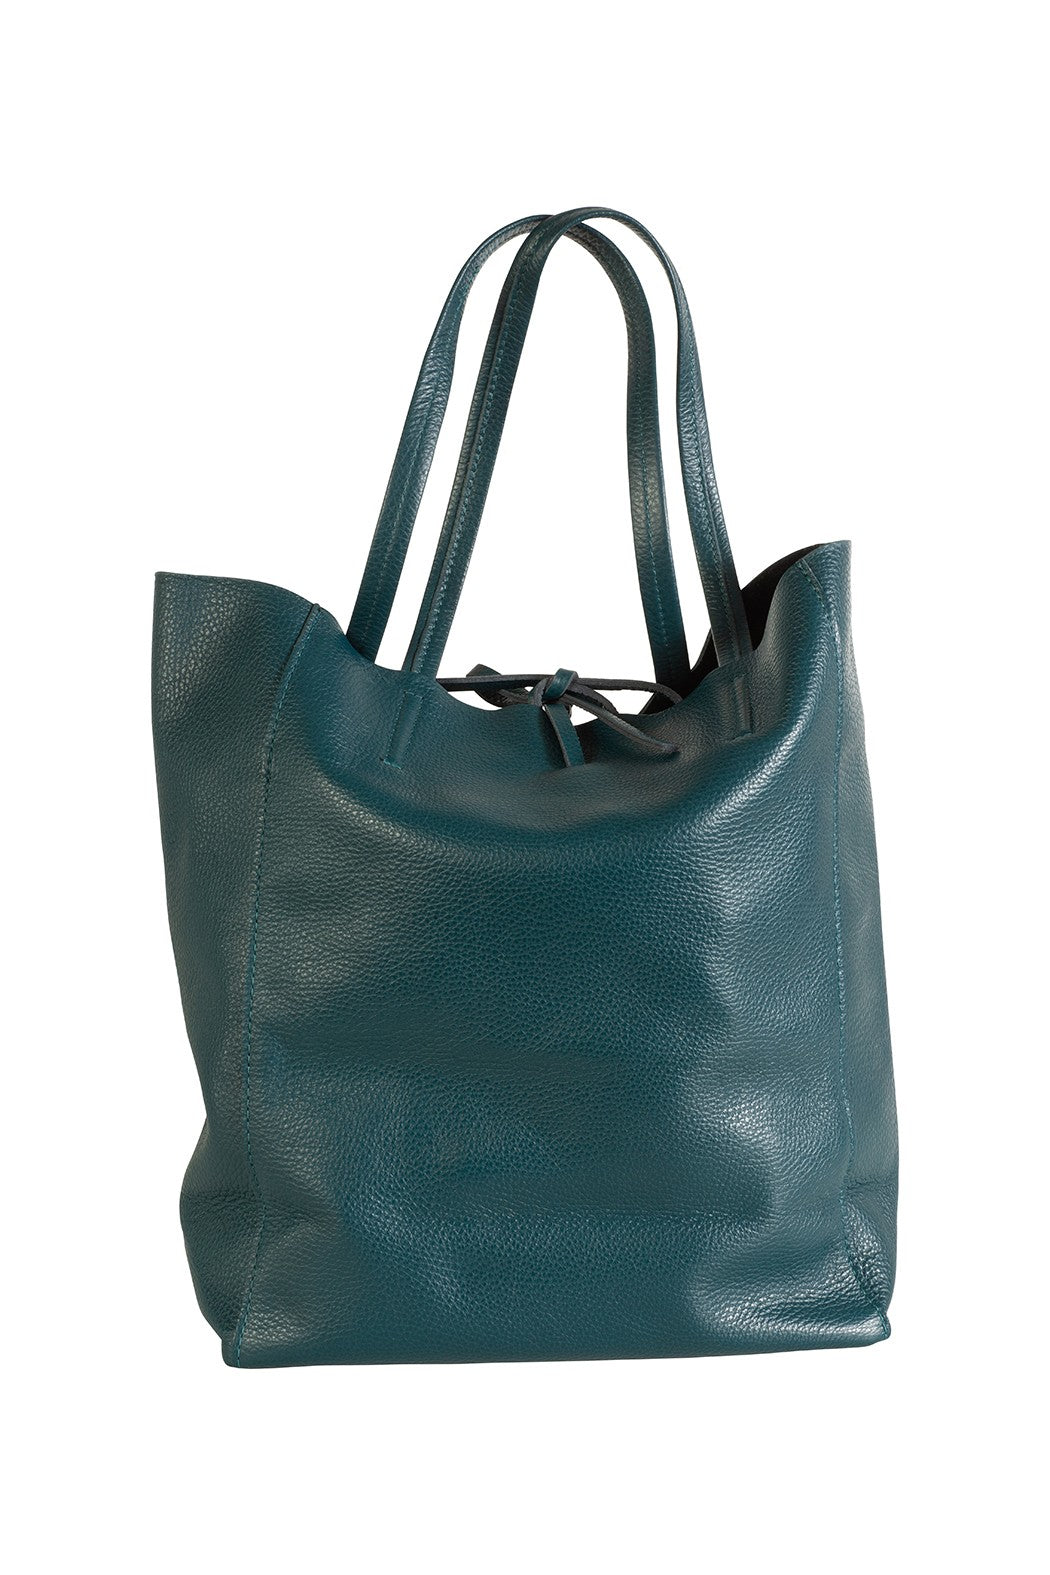 Italian leather shopper tote bag tie top teal